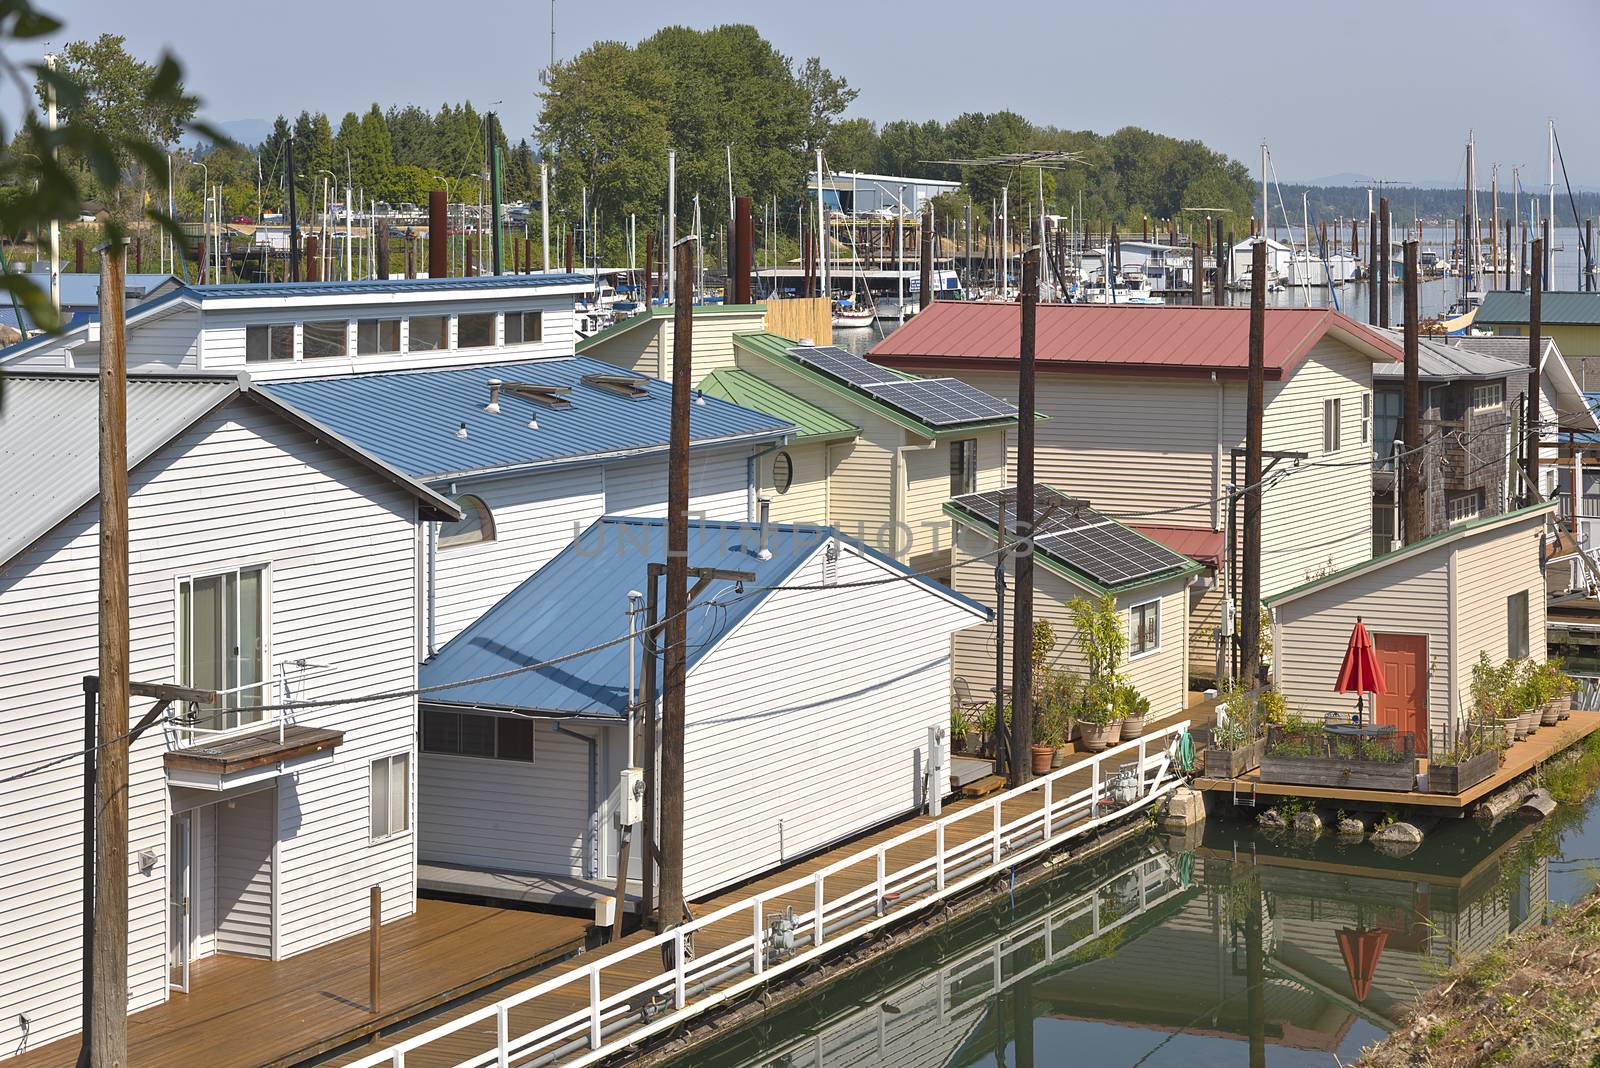 Rooftops and floating houses in a marina portland Oregon.